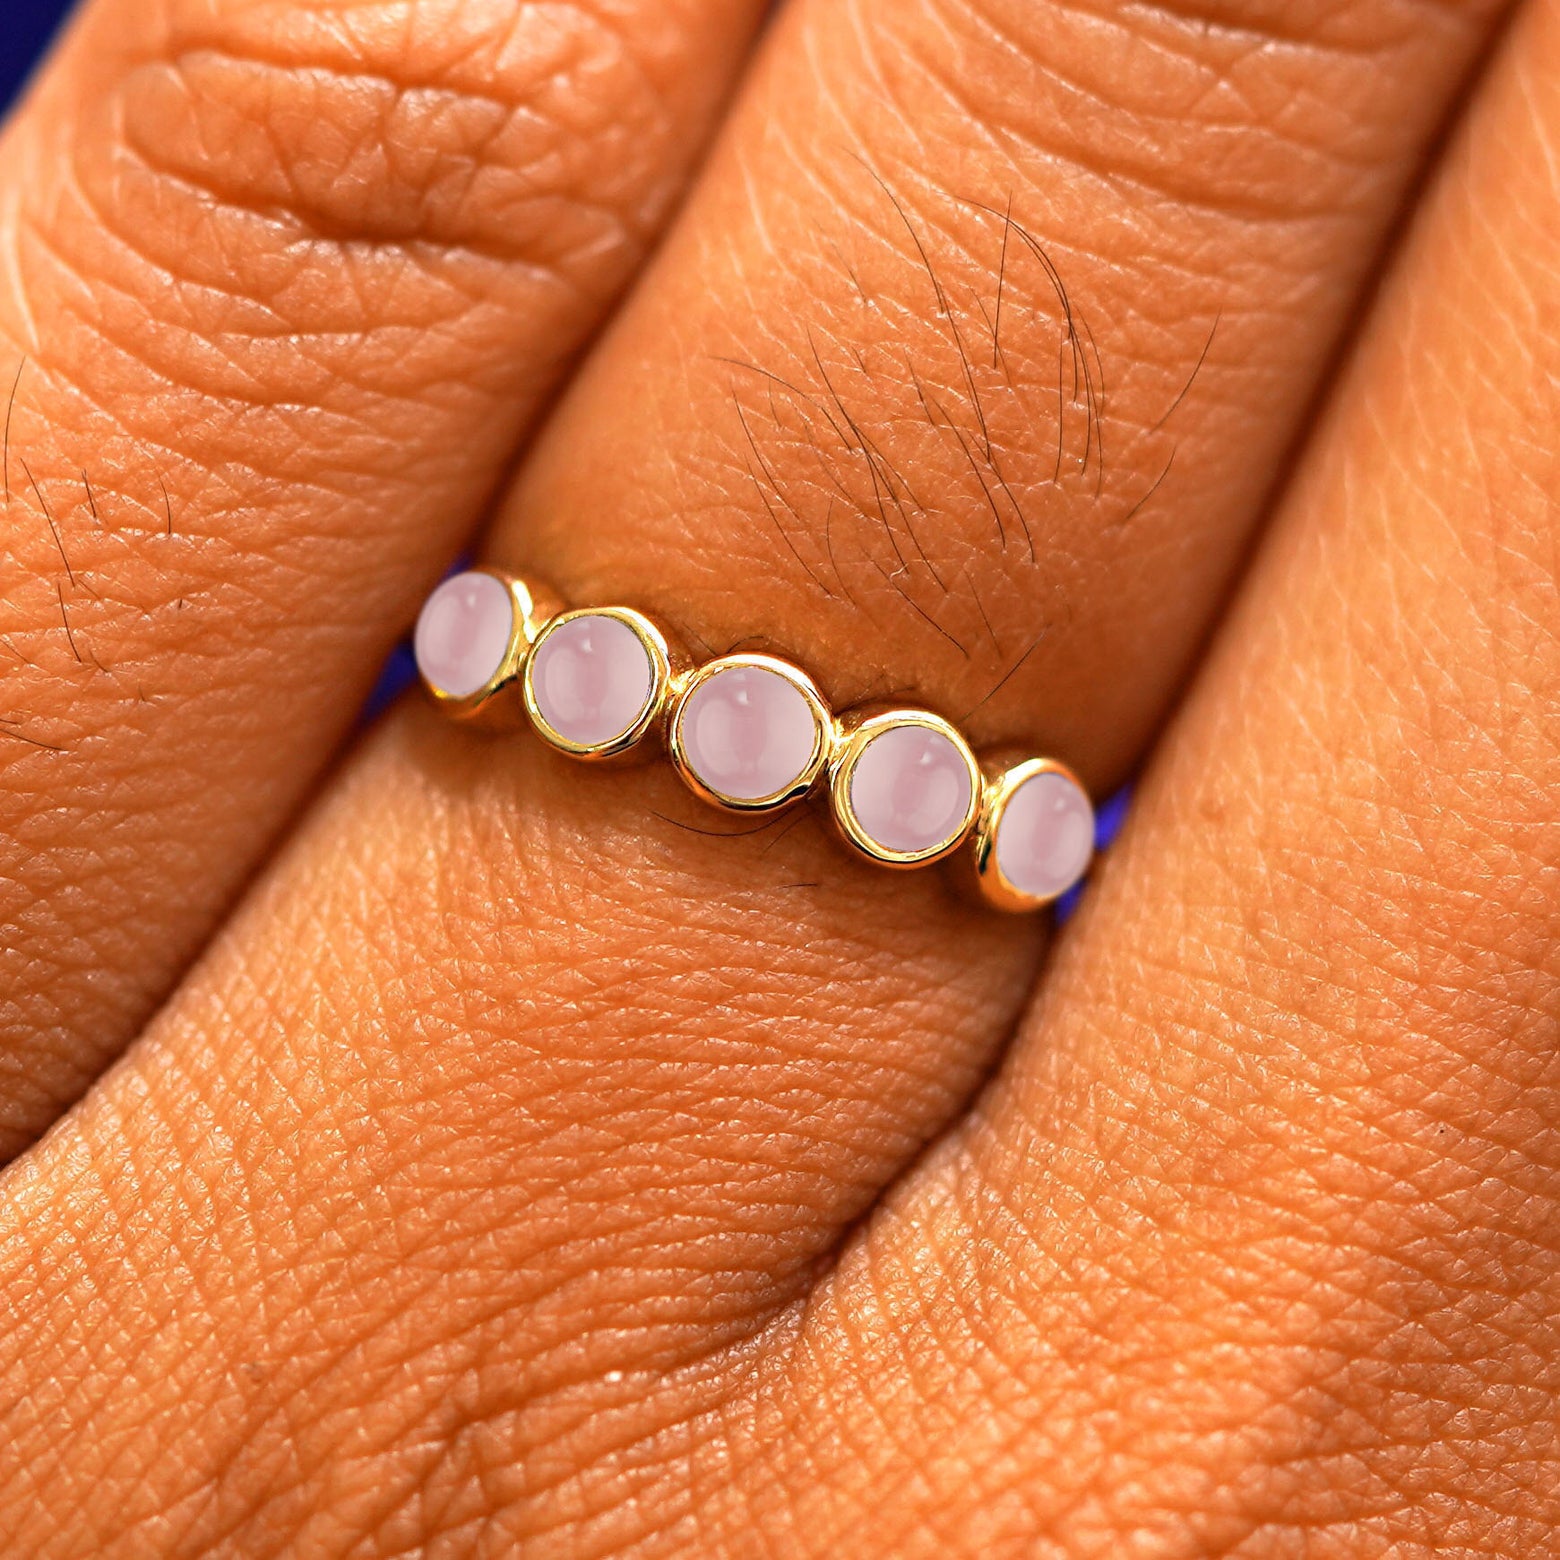 Close up view of a model's hand wearing a yellow gold 5 Gemstones Ring in rose quartz